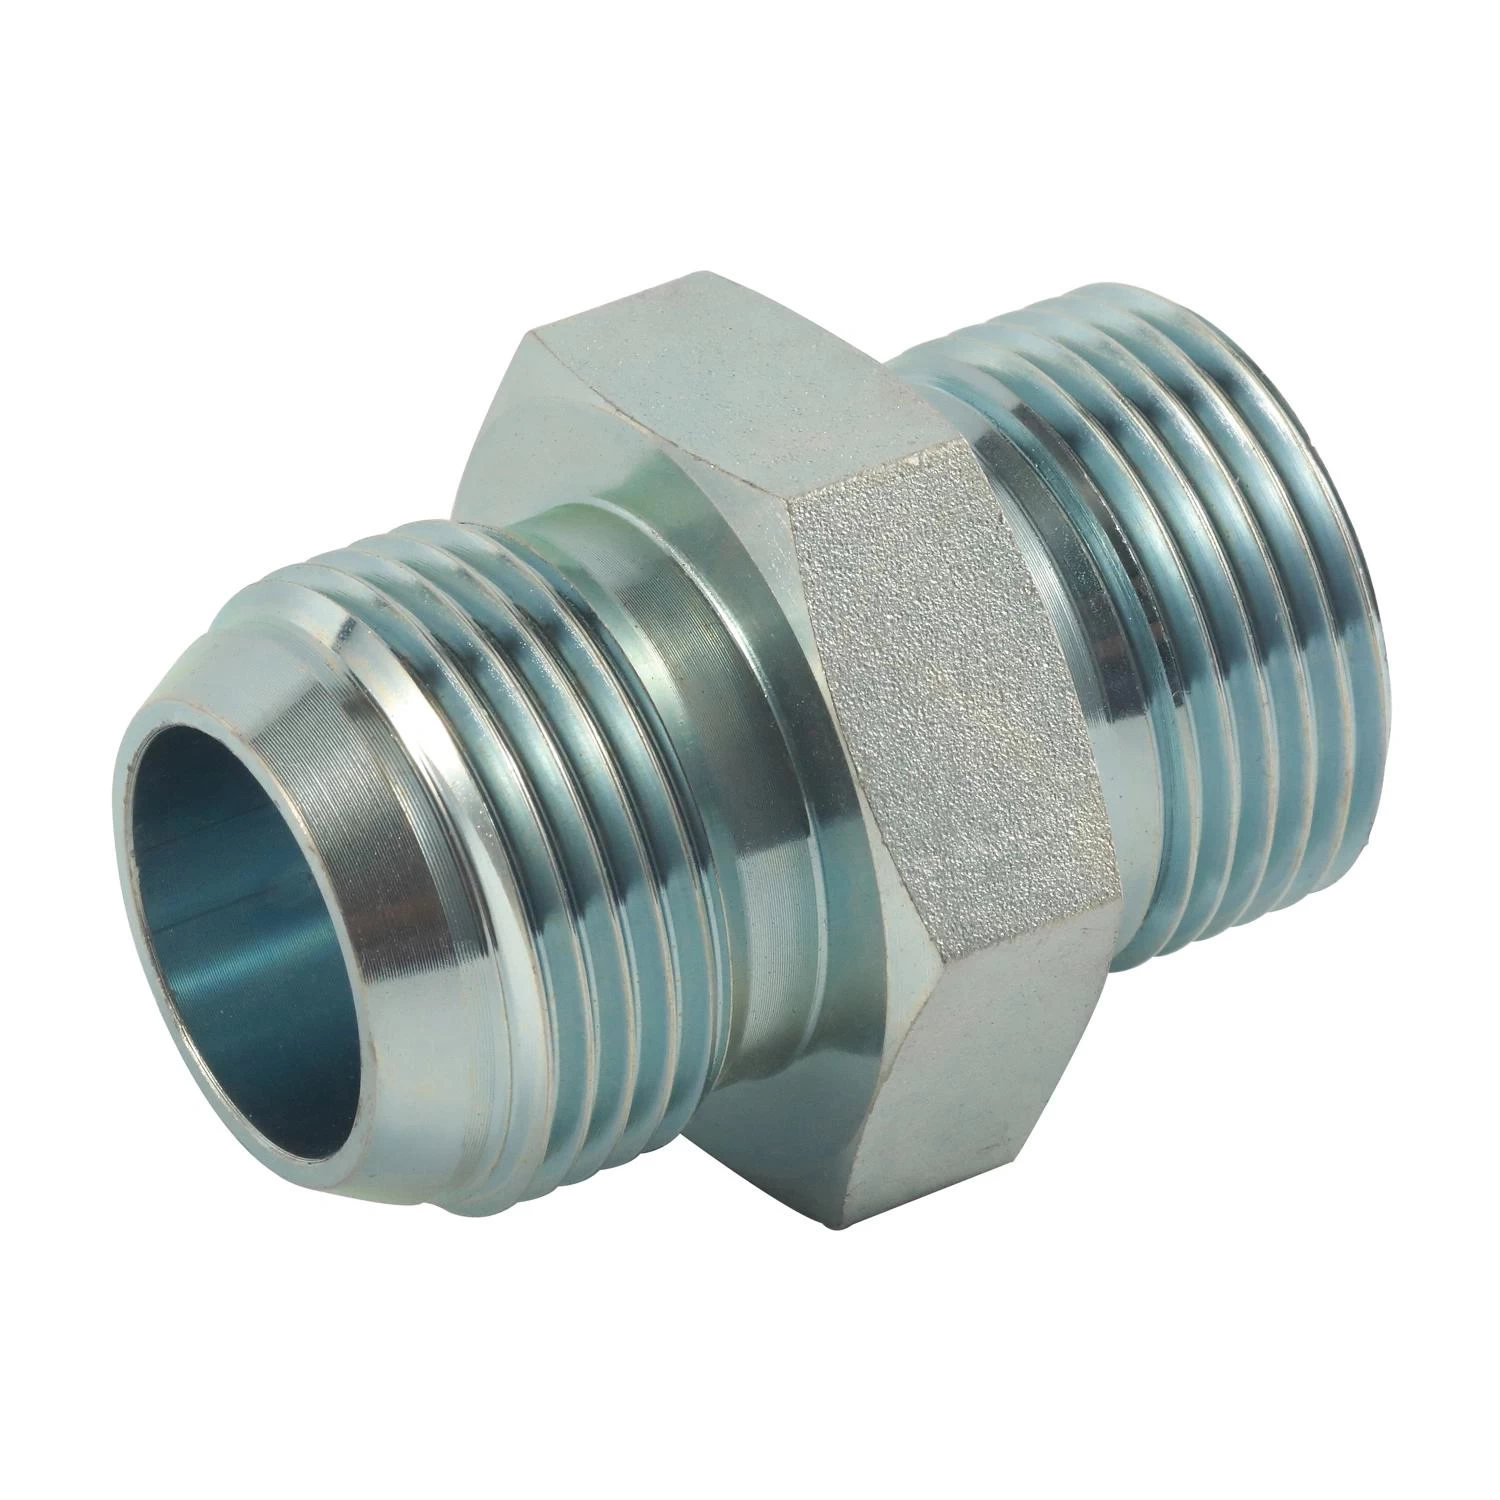 China 1JH tube fittings manufacturer